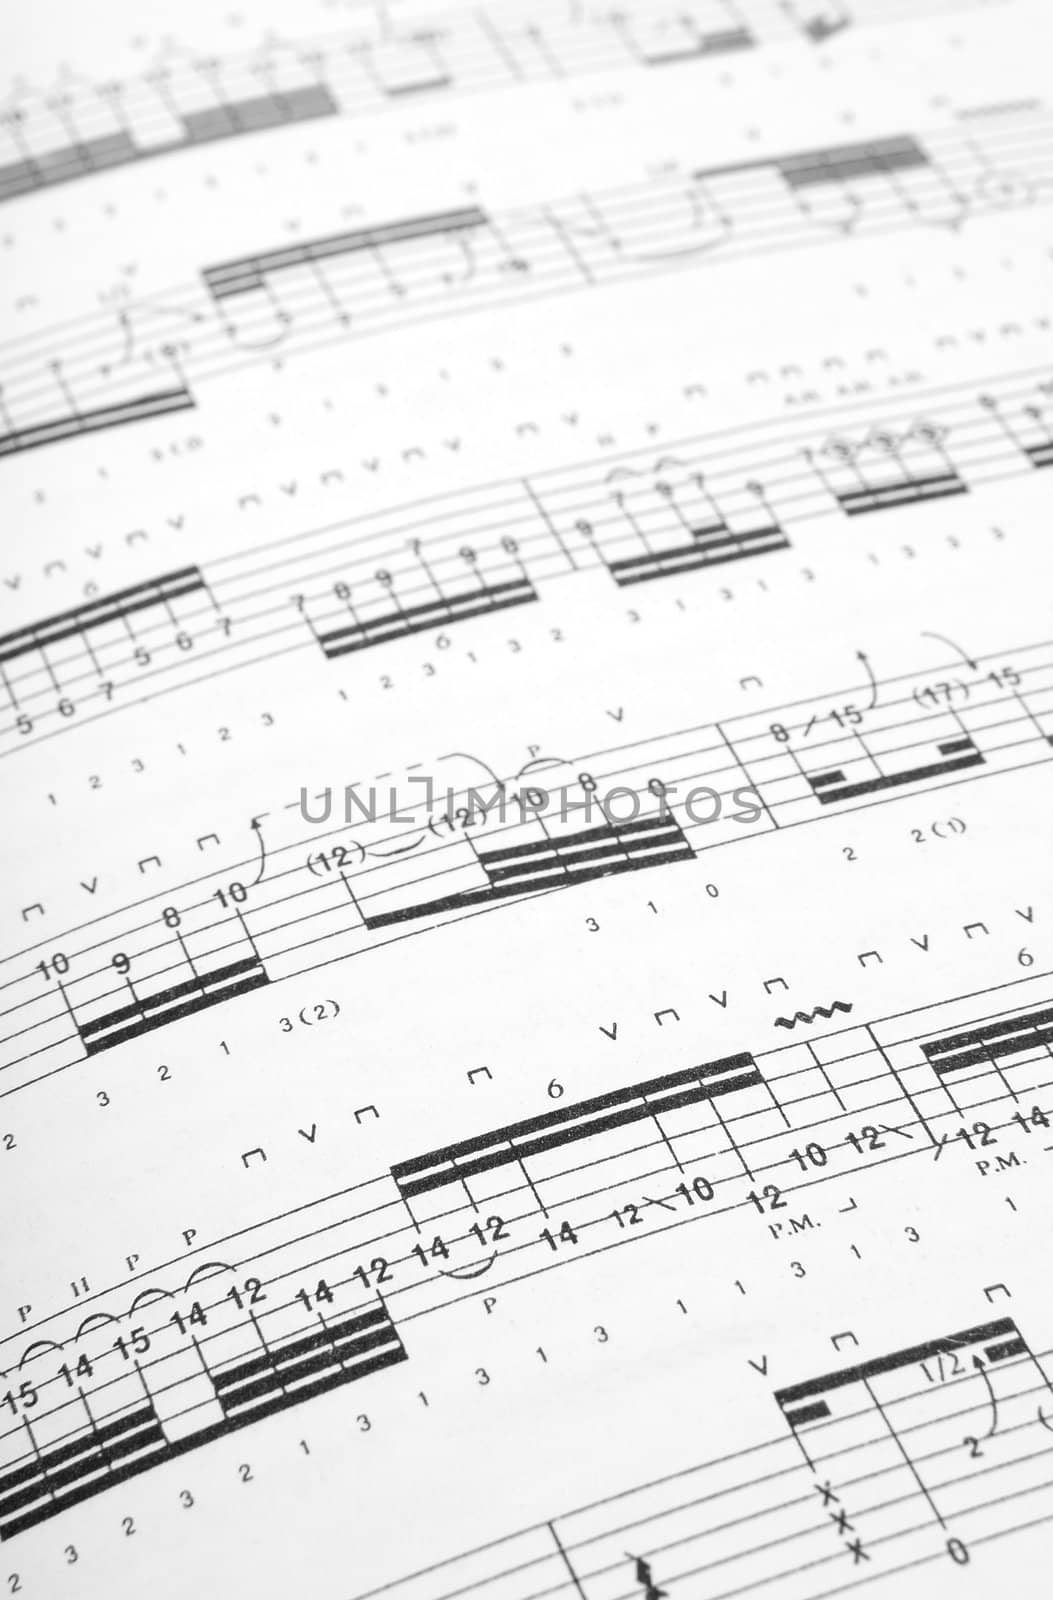 Guitar tabs background. Shallow DOF.